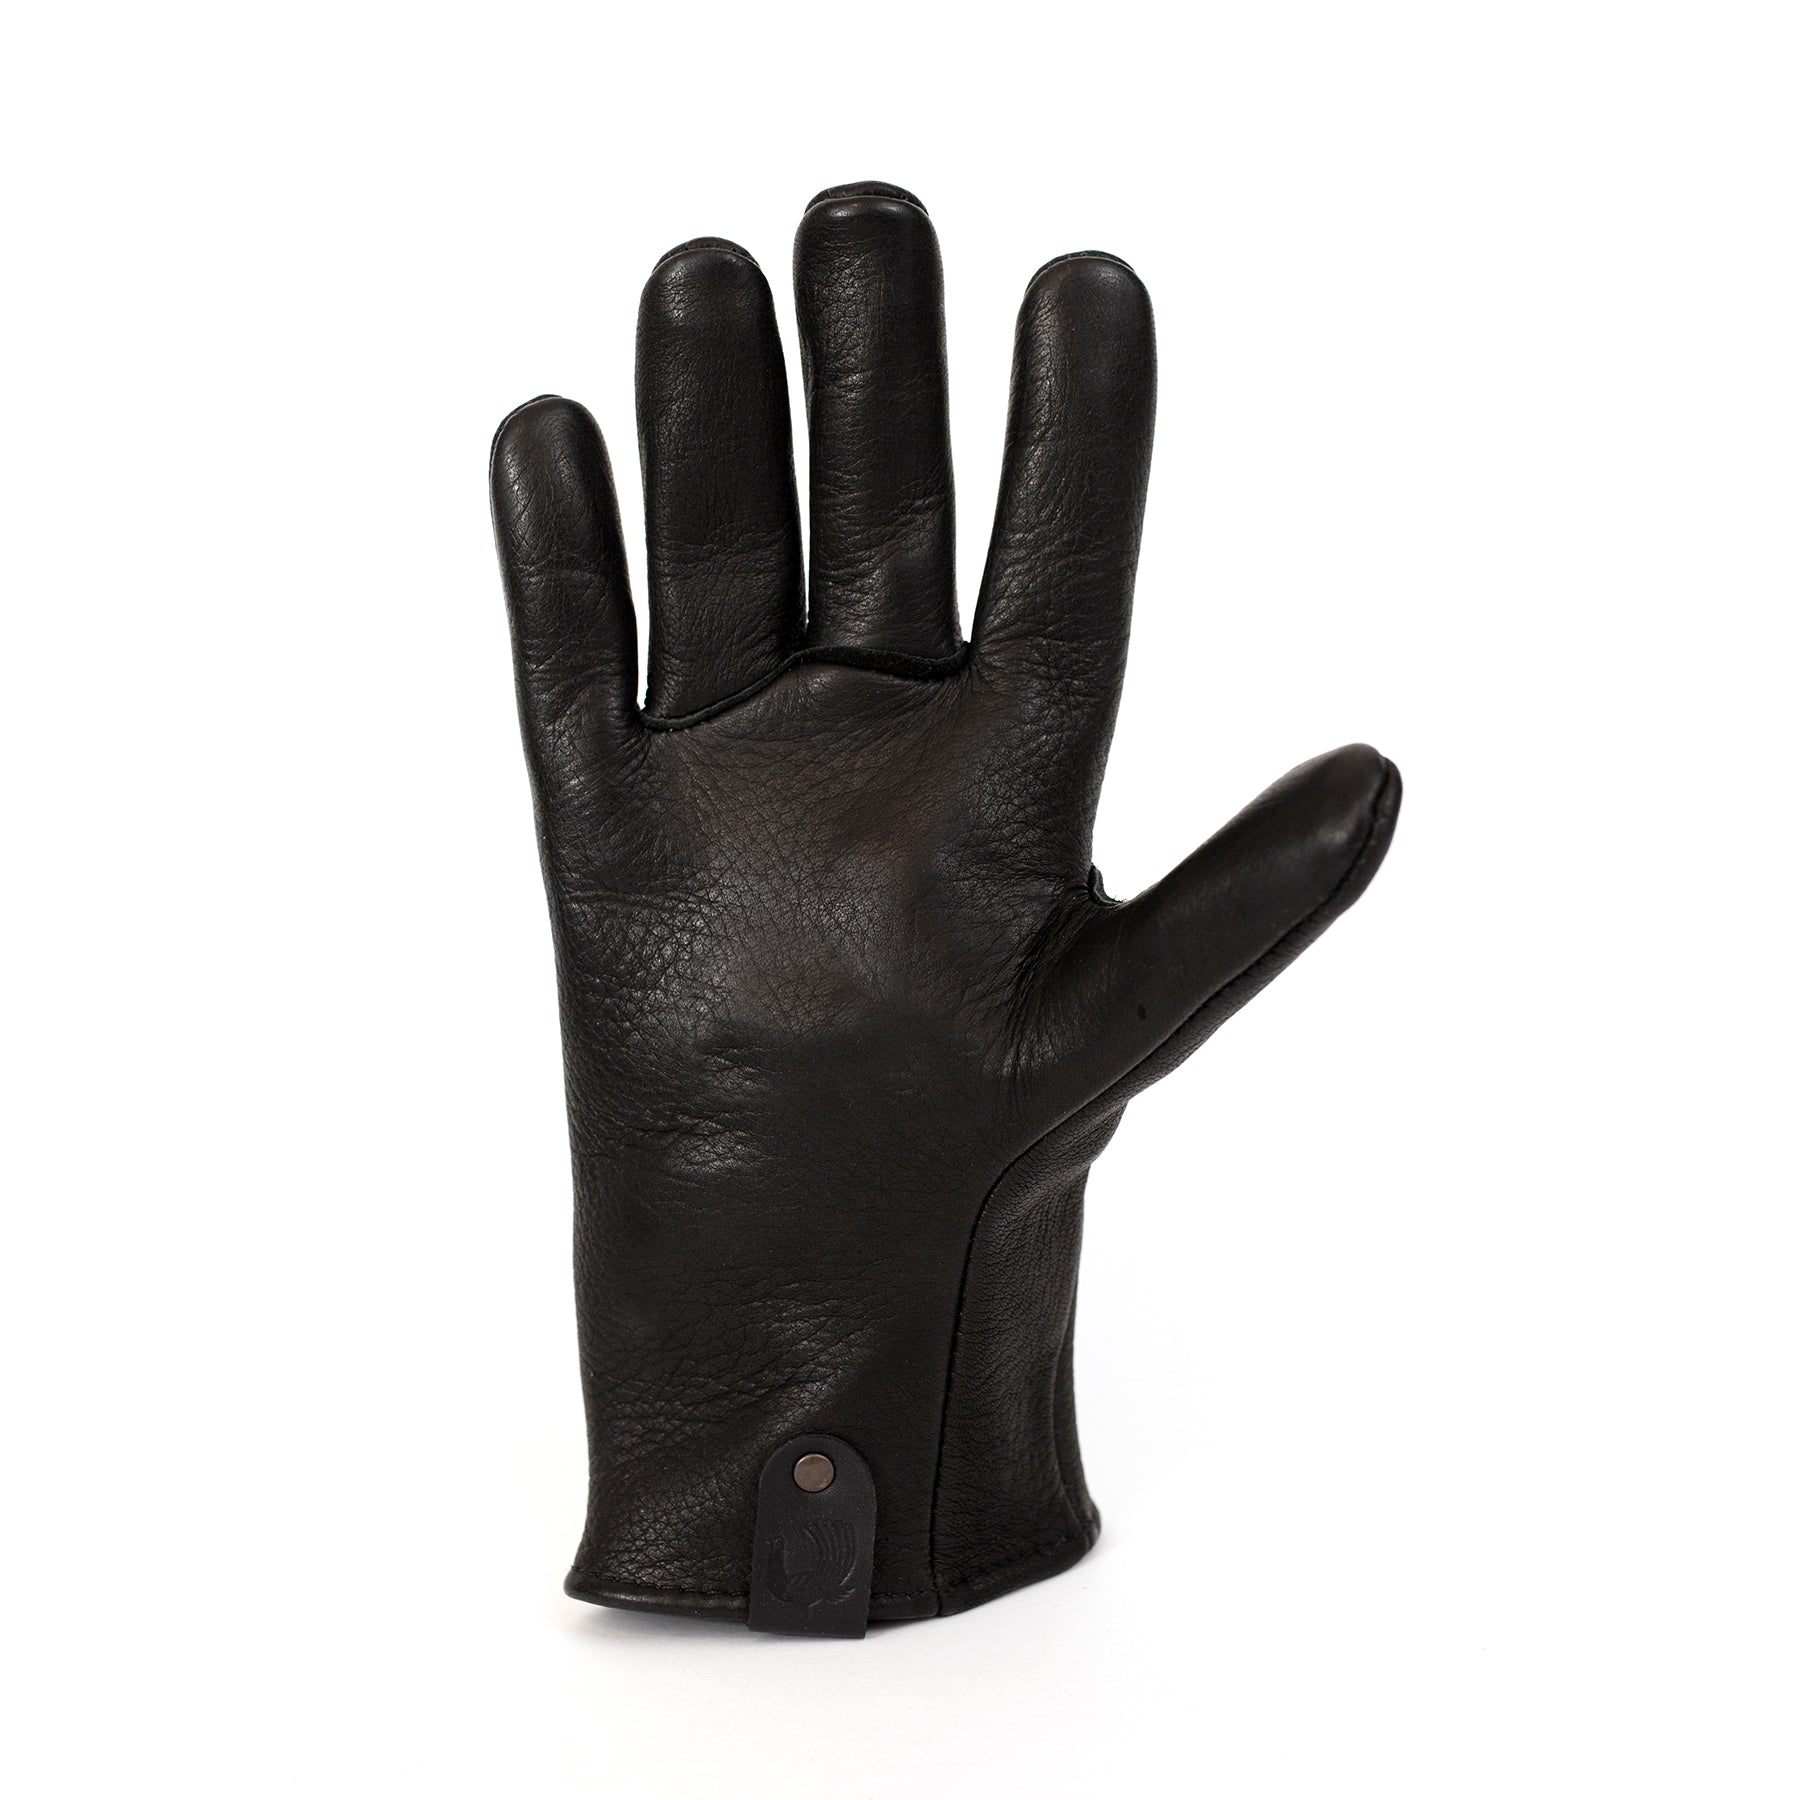 leather glove, black leather glove, made in usa glove, motorcycle glove, driving glove, best leather glove, red clouds glove